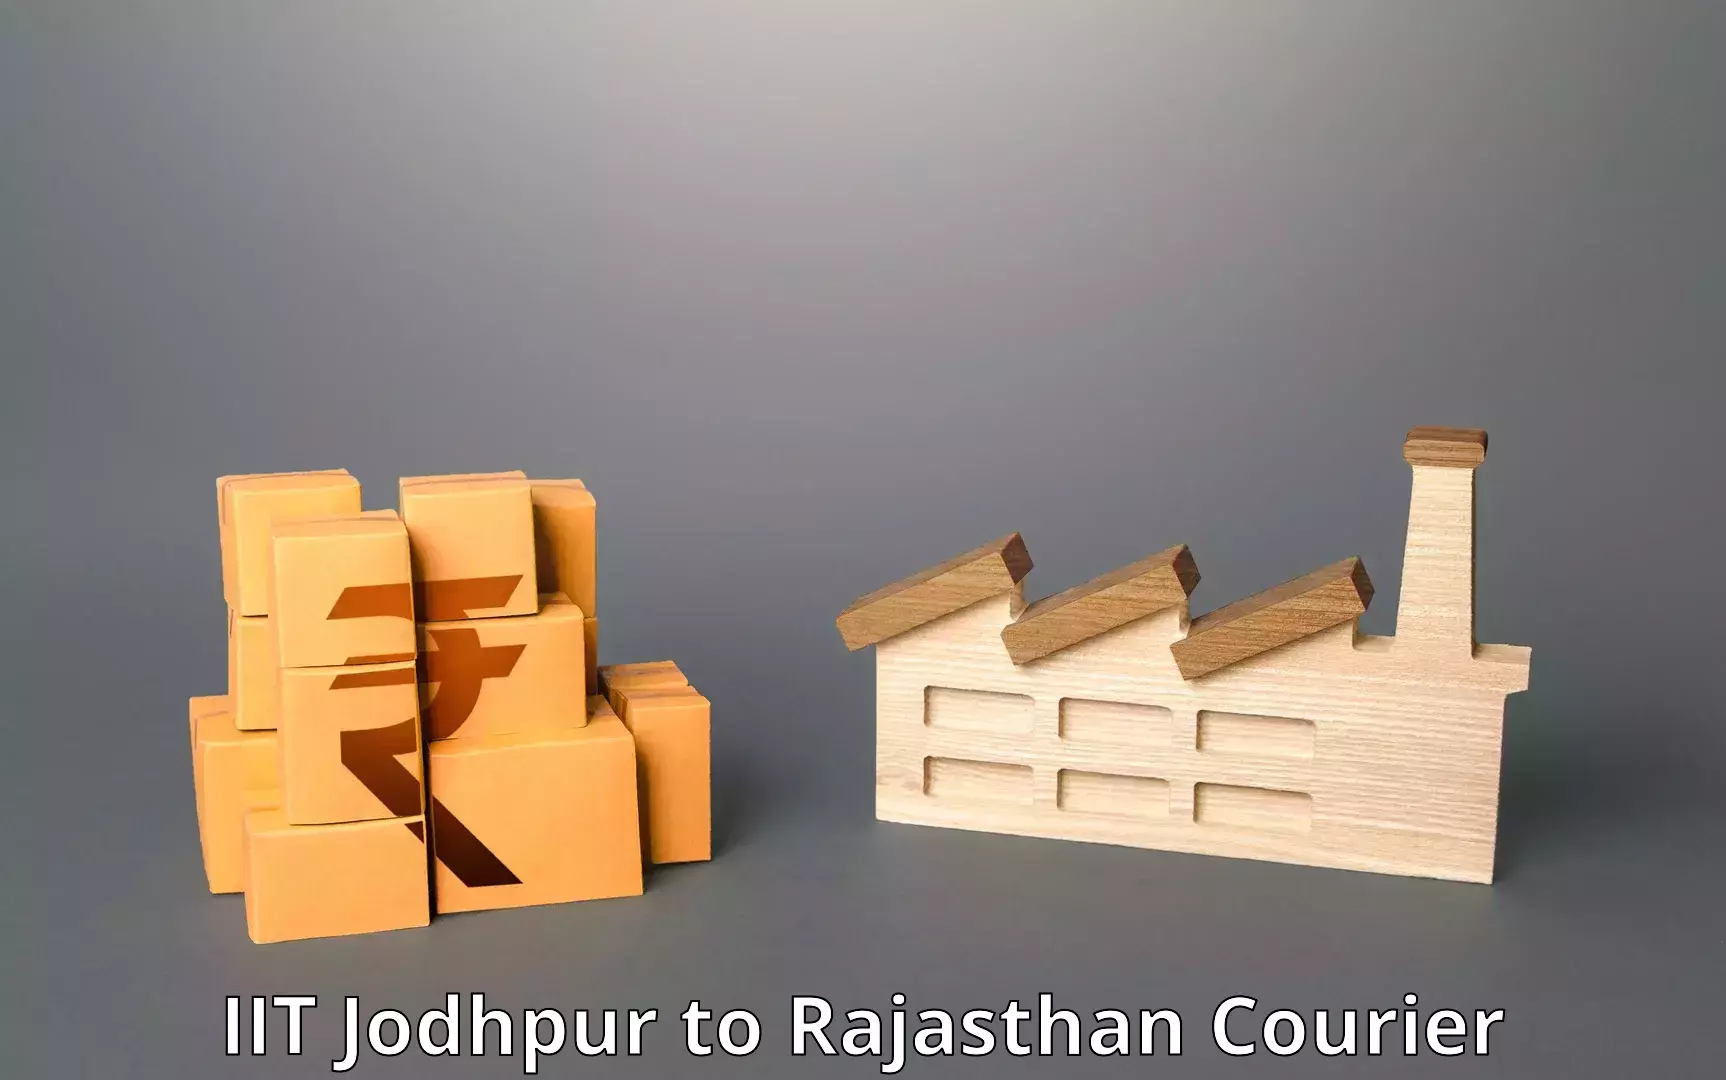 Parcel service for businesses IIT Jodhpur to Rajasthan